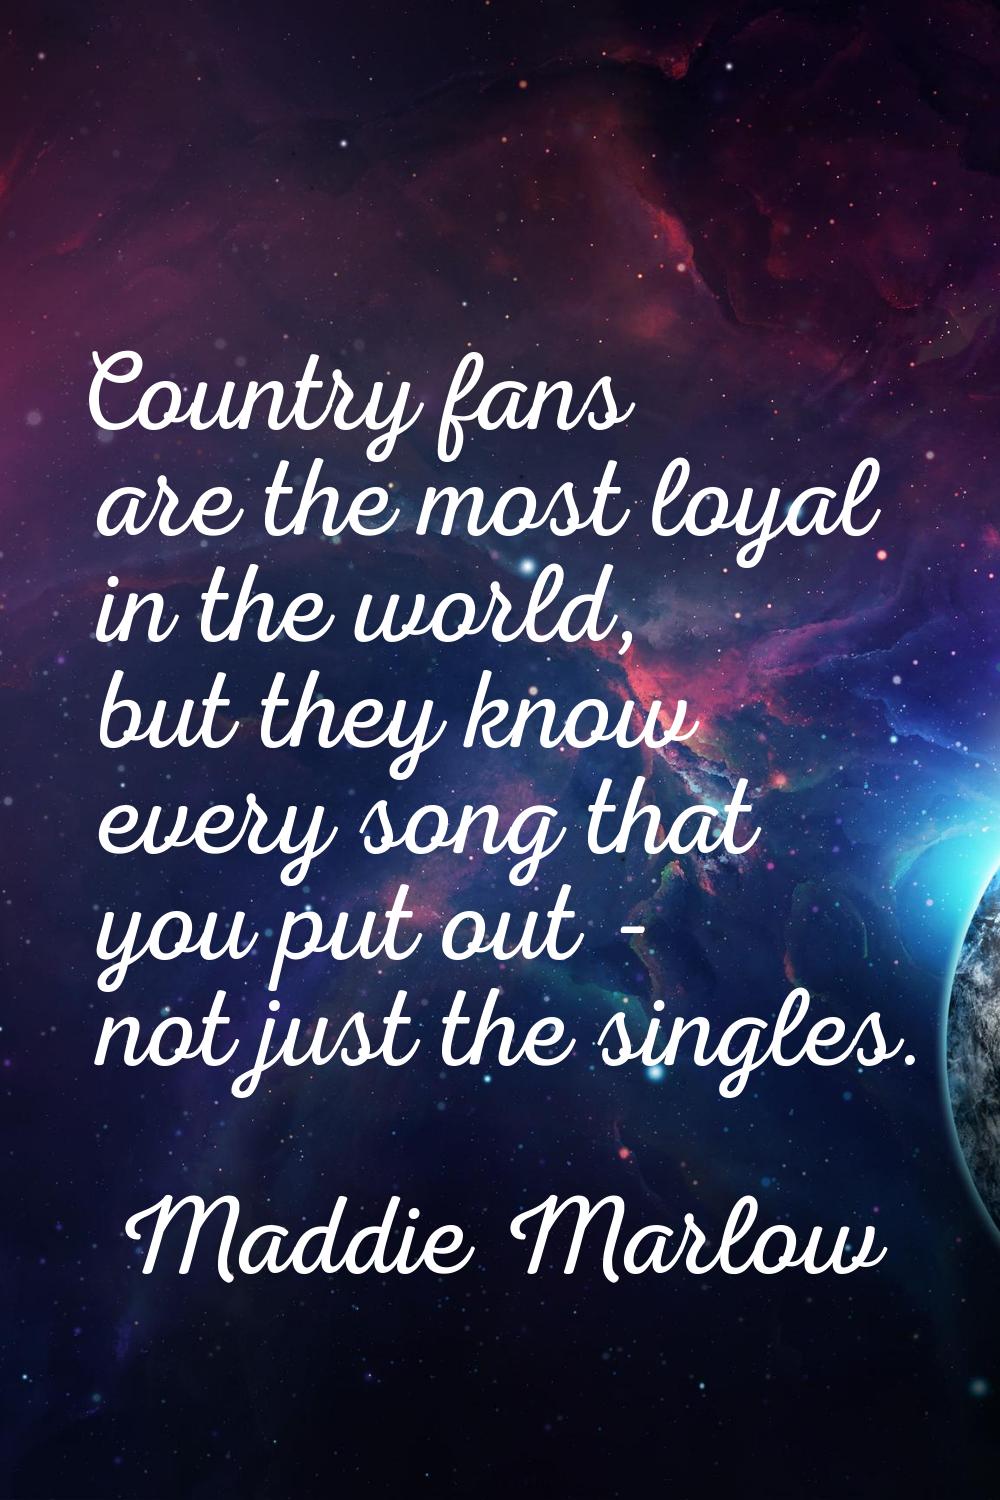 Country fans are the most loyal in the world, but they know every song that you put out - not just 